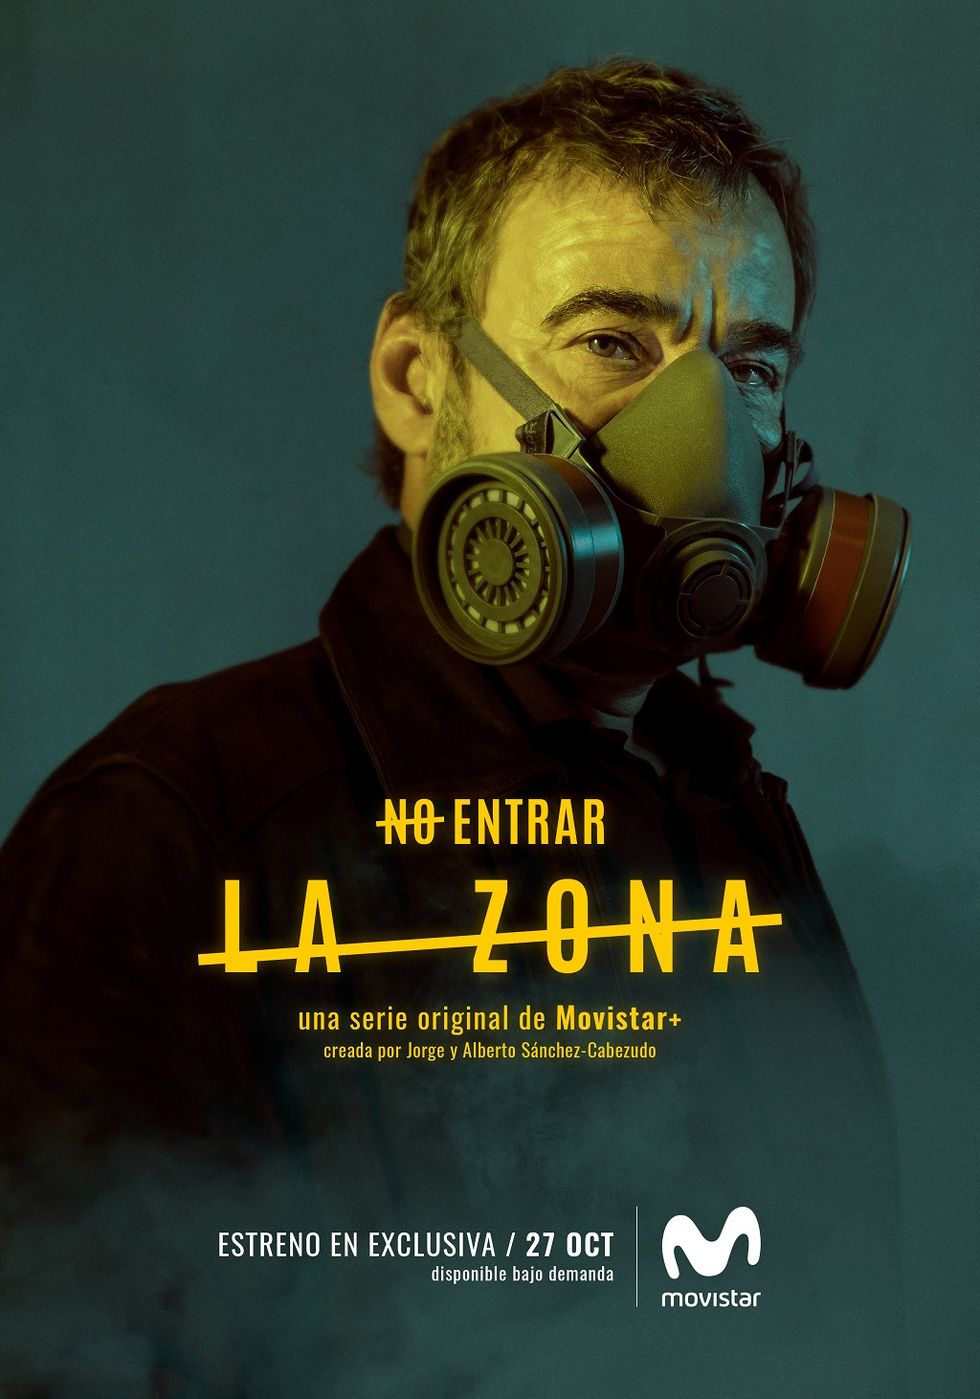 Personal protective equipment, Poster, Gas mask, Movie, Mask, Headgear, Costume, Album cover, Advertising, 